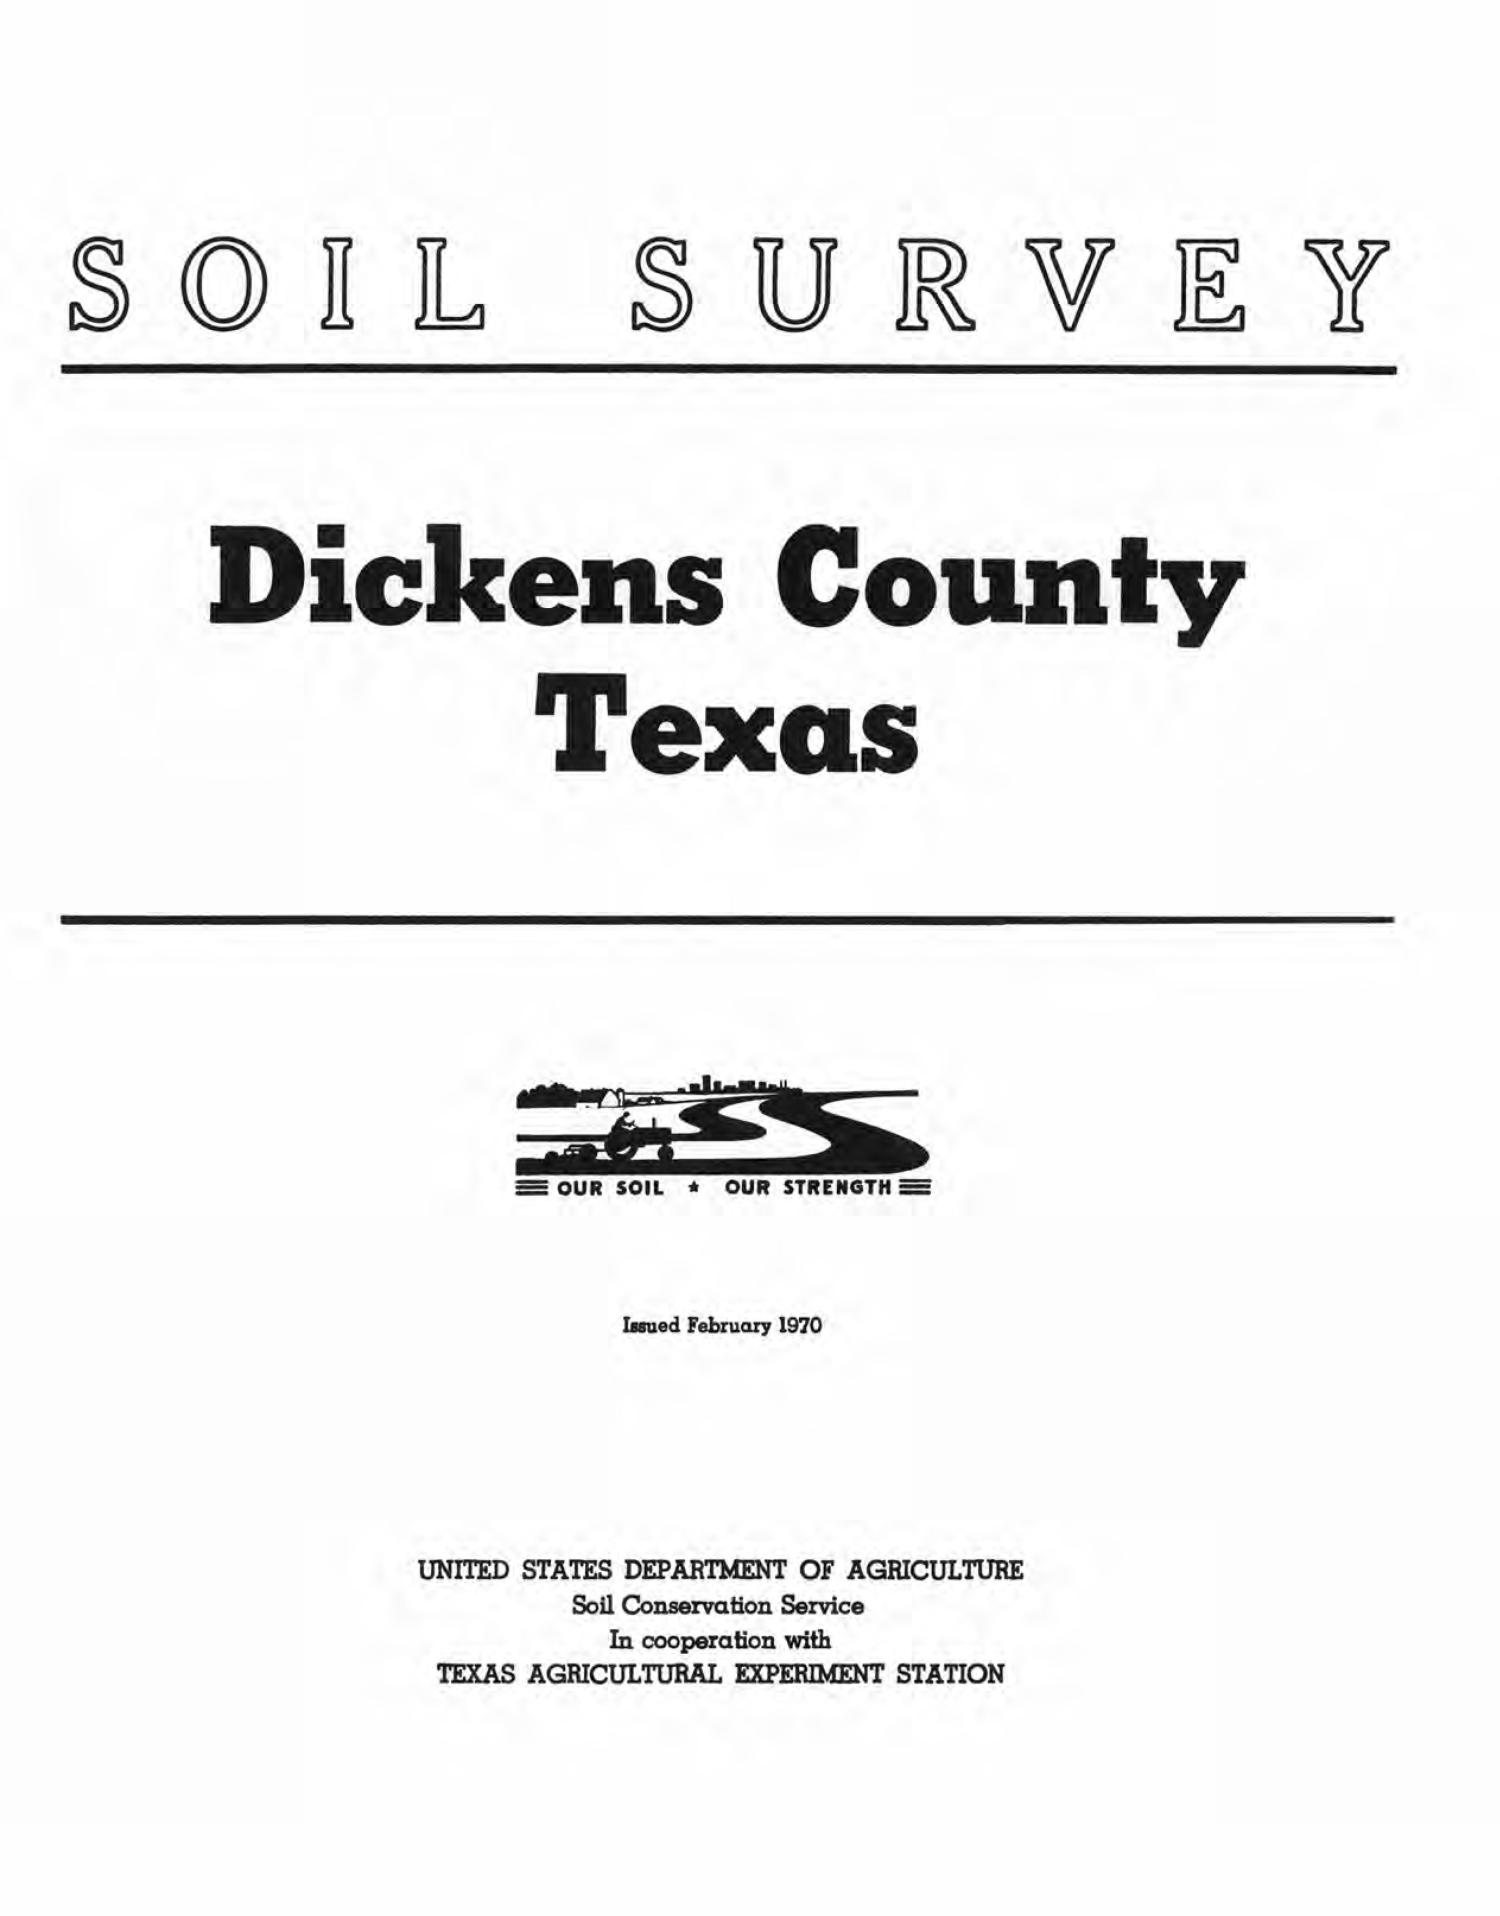 Soil Survey of Dickens County, Texas
                                                
                                                    Front Cover
                                                